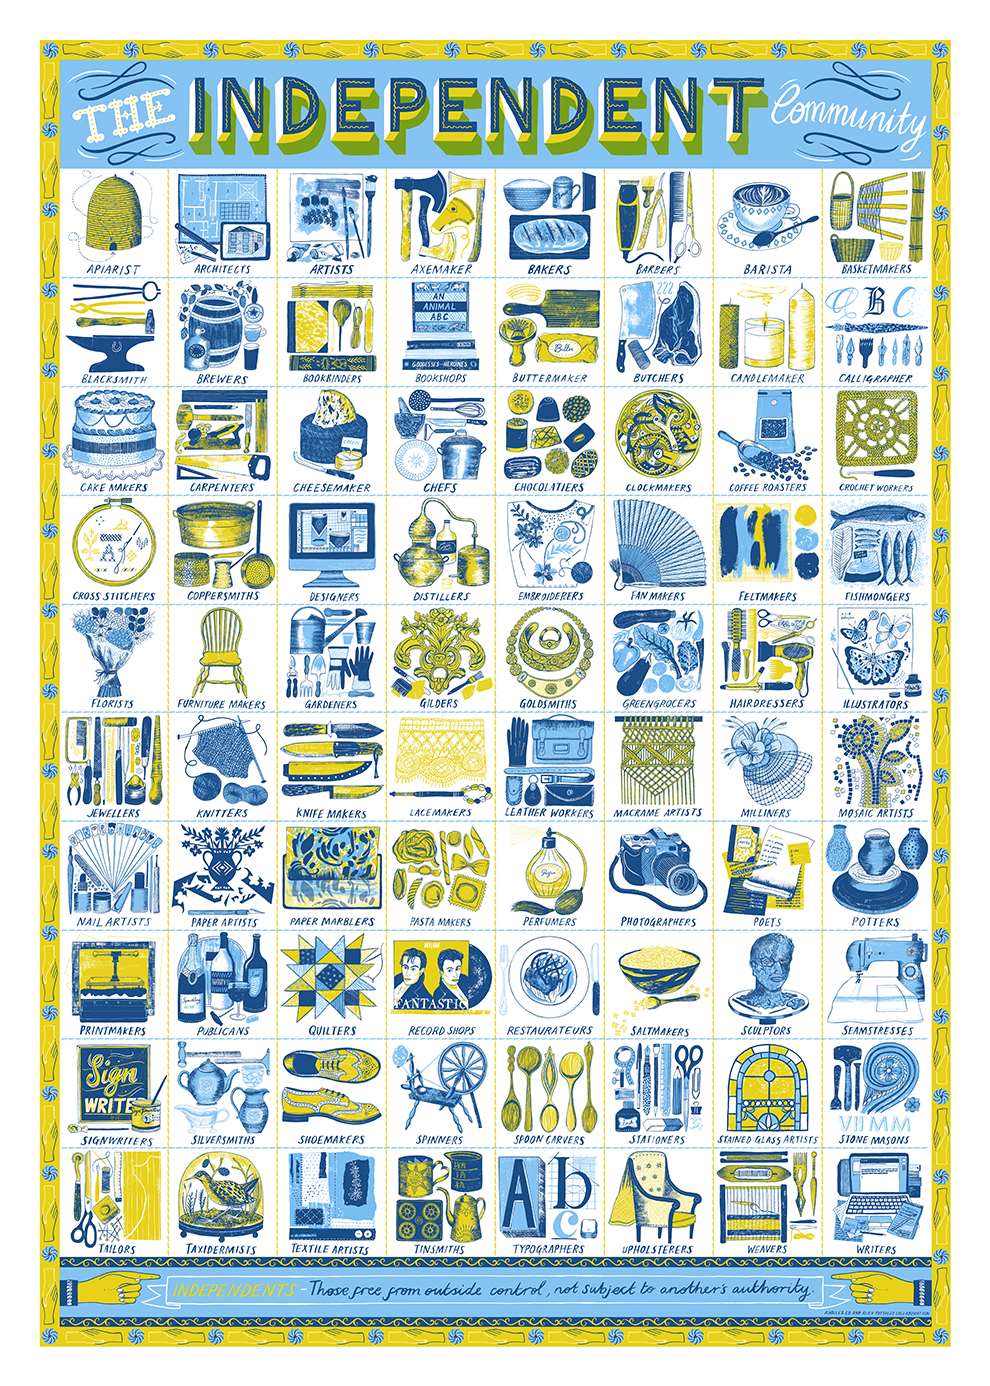 Alice Pattullo, Detailed intricate illustrated poster of independent artist trades including bakers, artists, florists, screen printers etc.